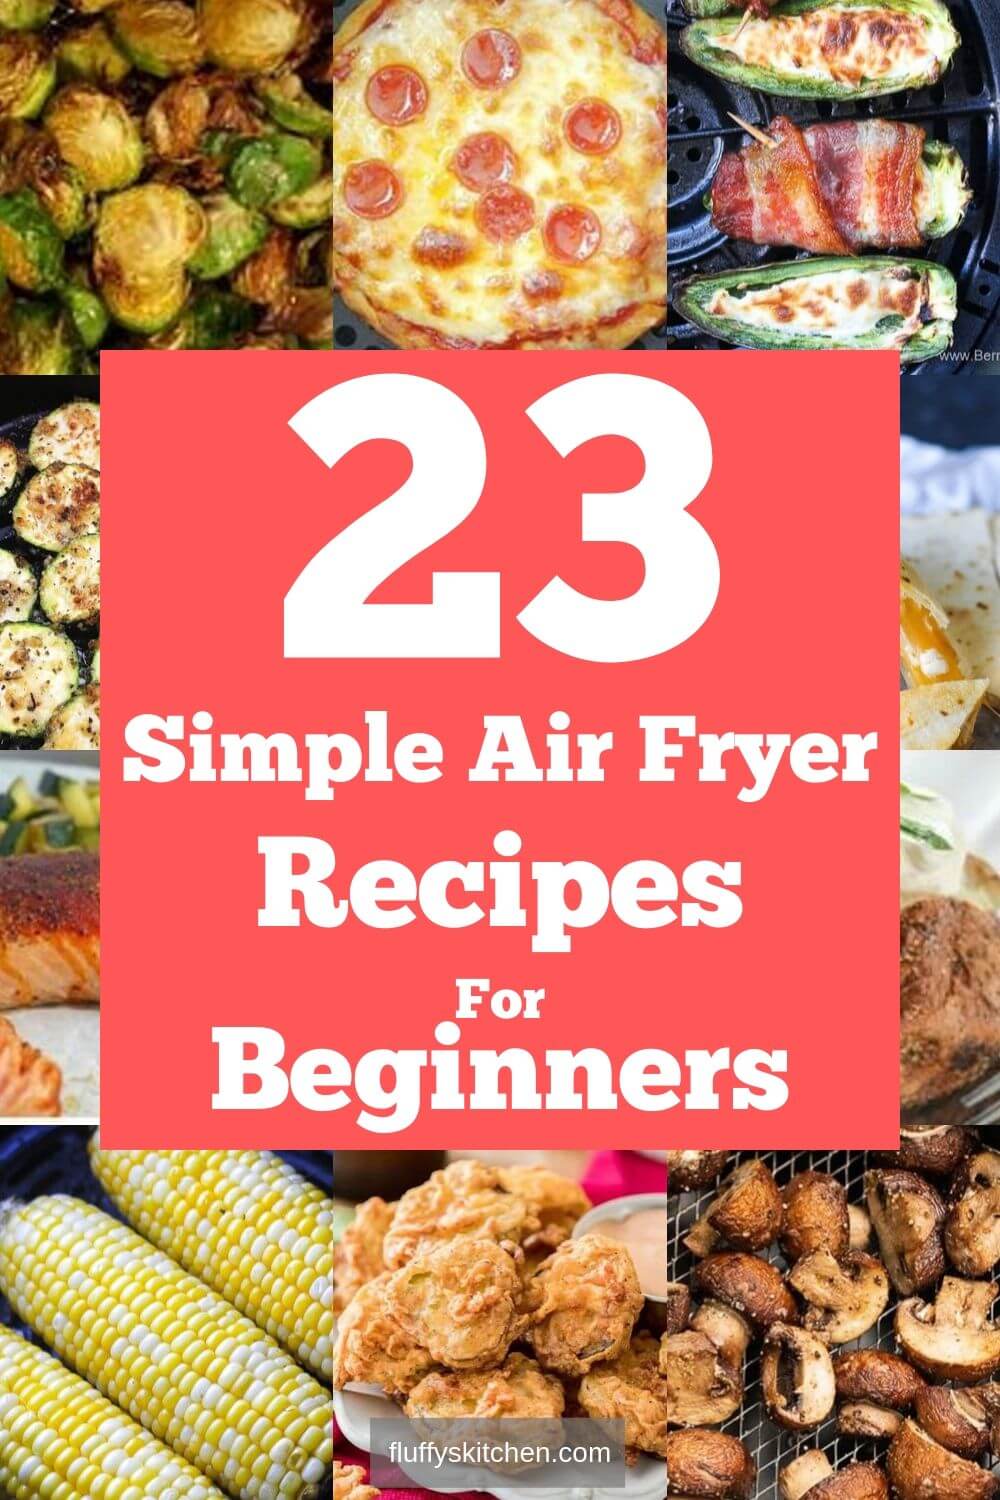 23 Simple Air Fryer Recipes For Beginners - Fluffy's Kitchen